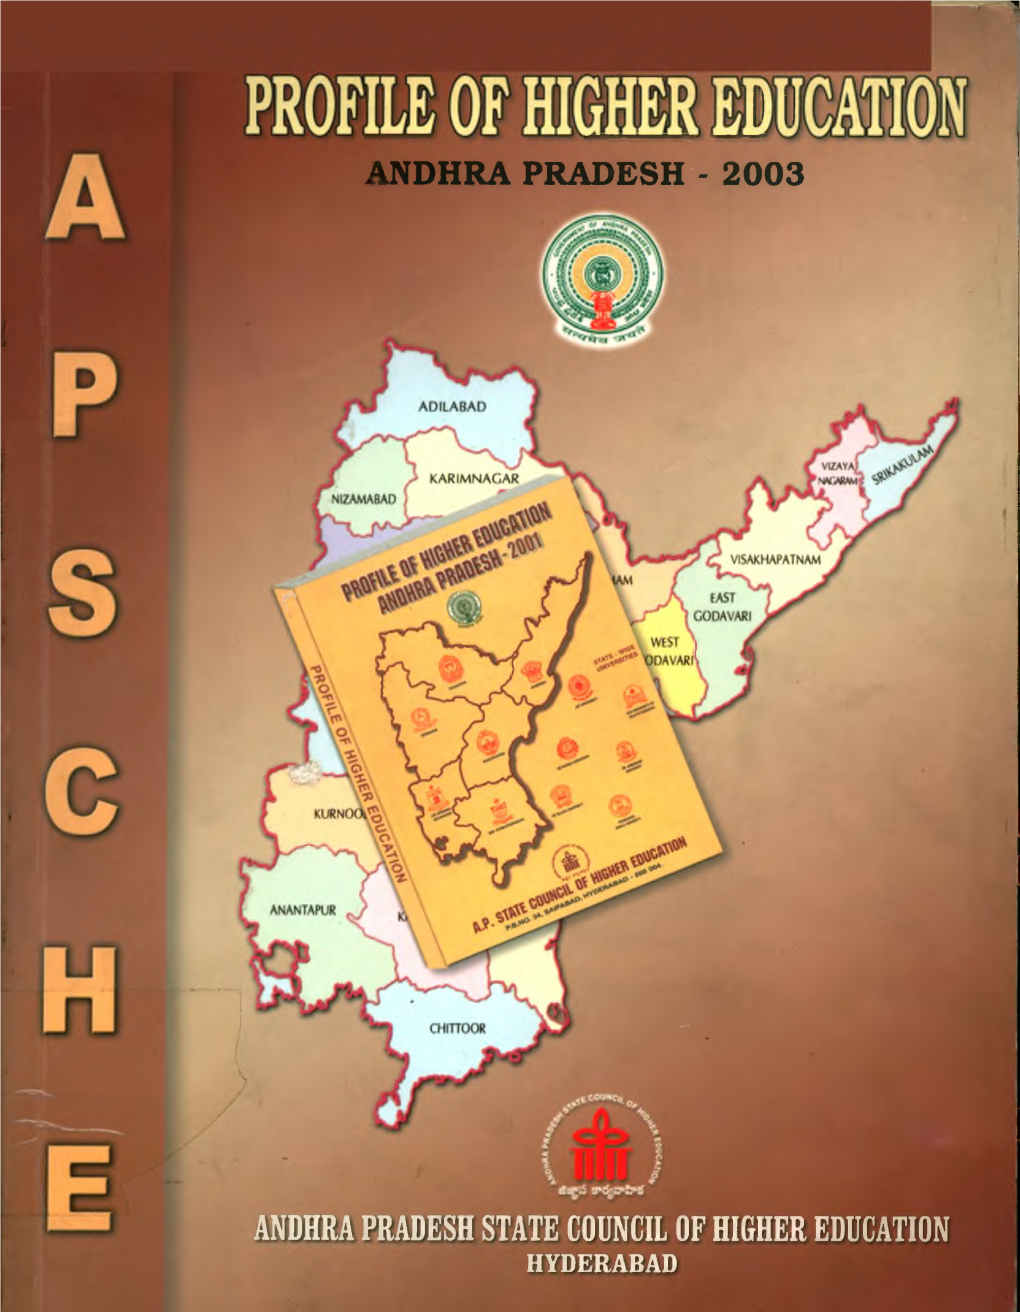 Andhra Pradesh State Council of Higher Education Hyderabad Profile of Higher Educatiiin Andhra Pradesh